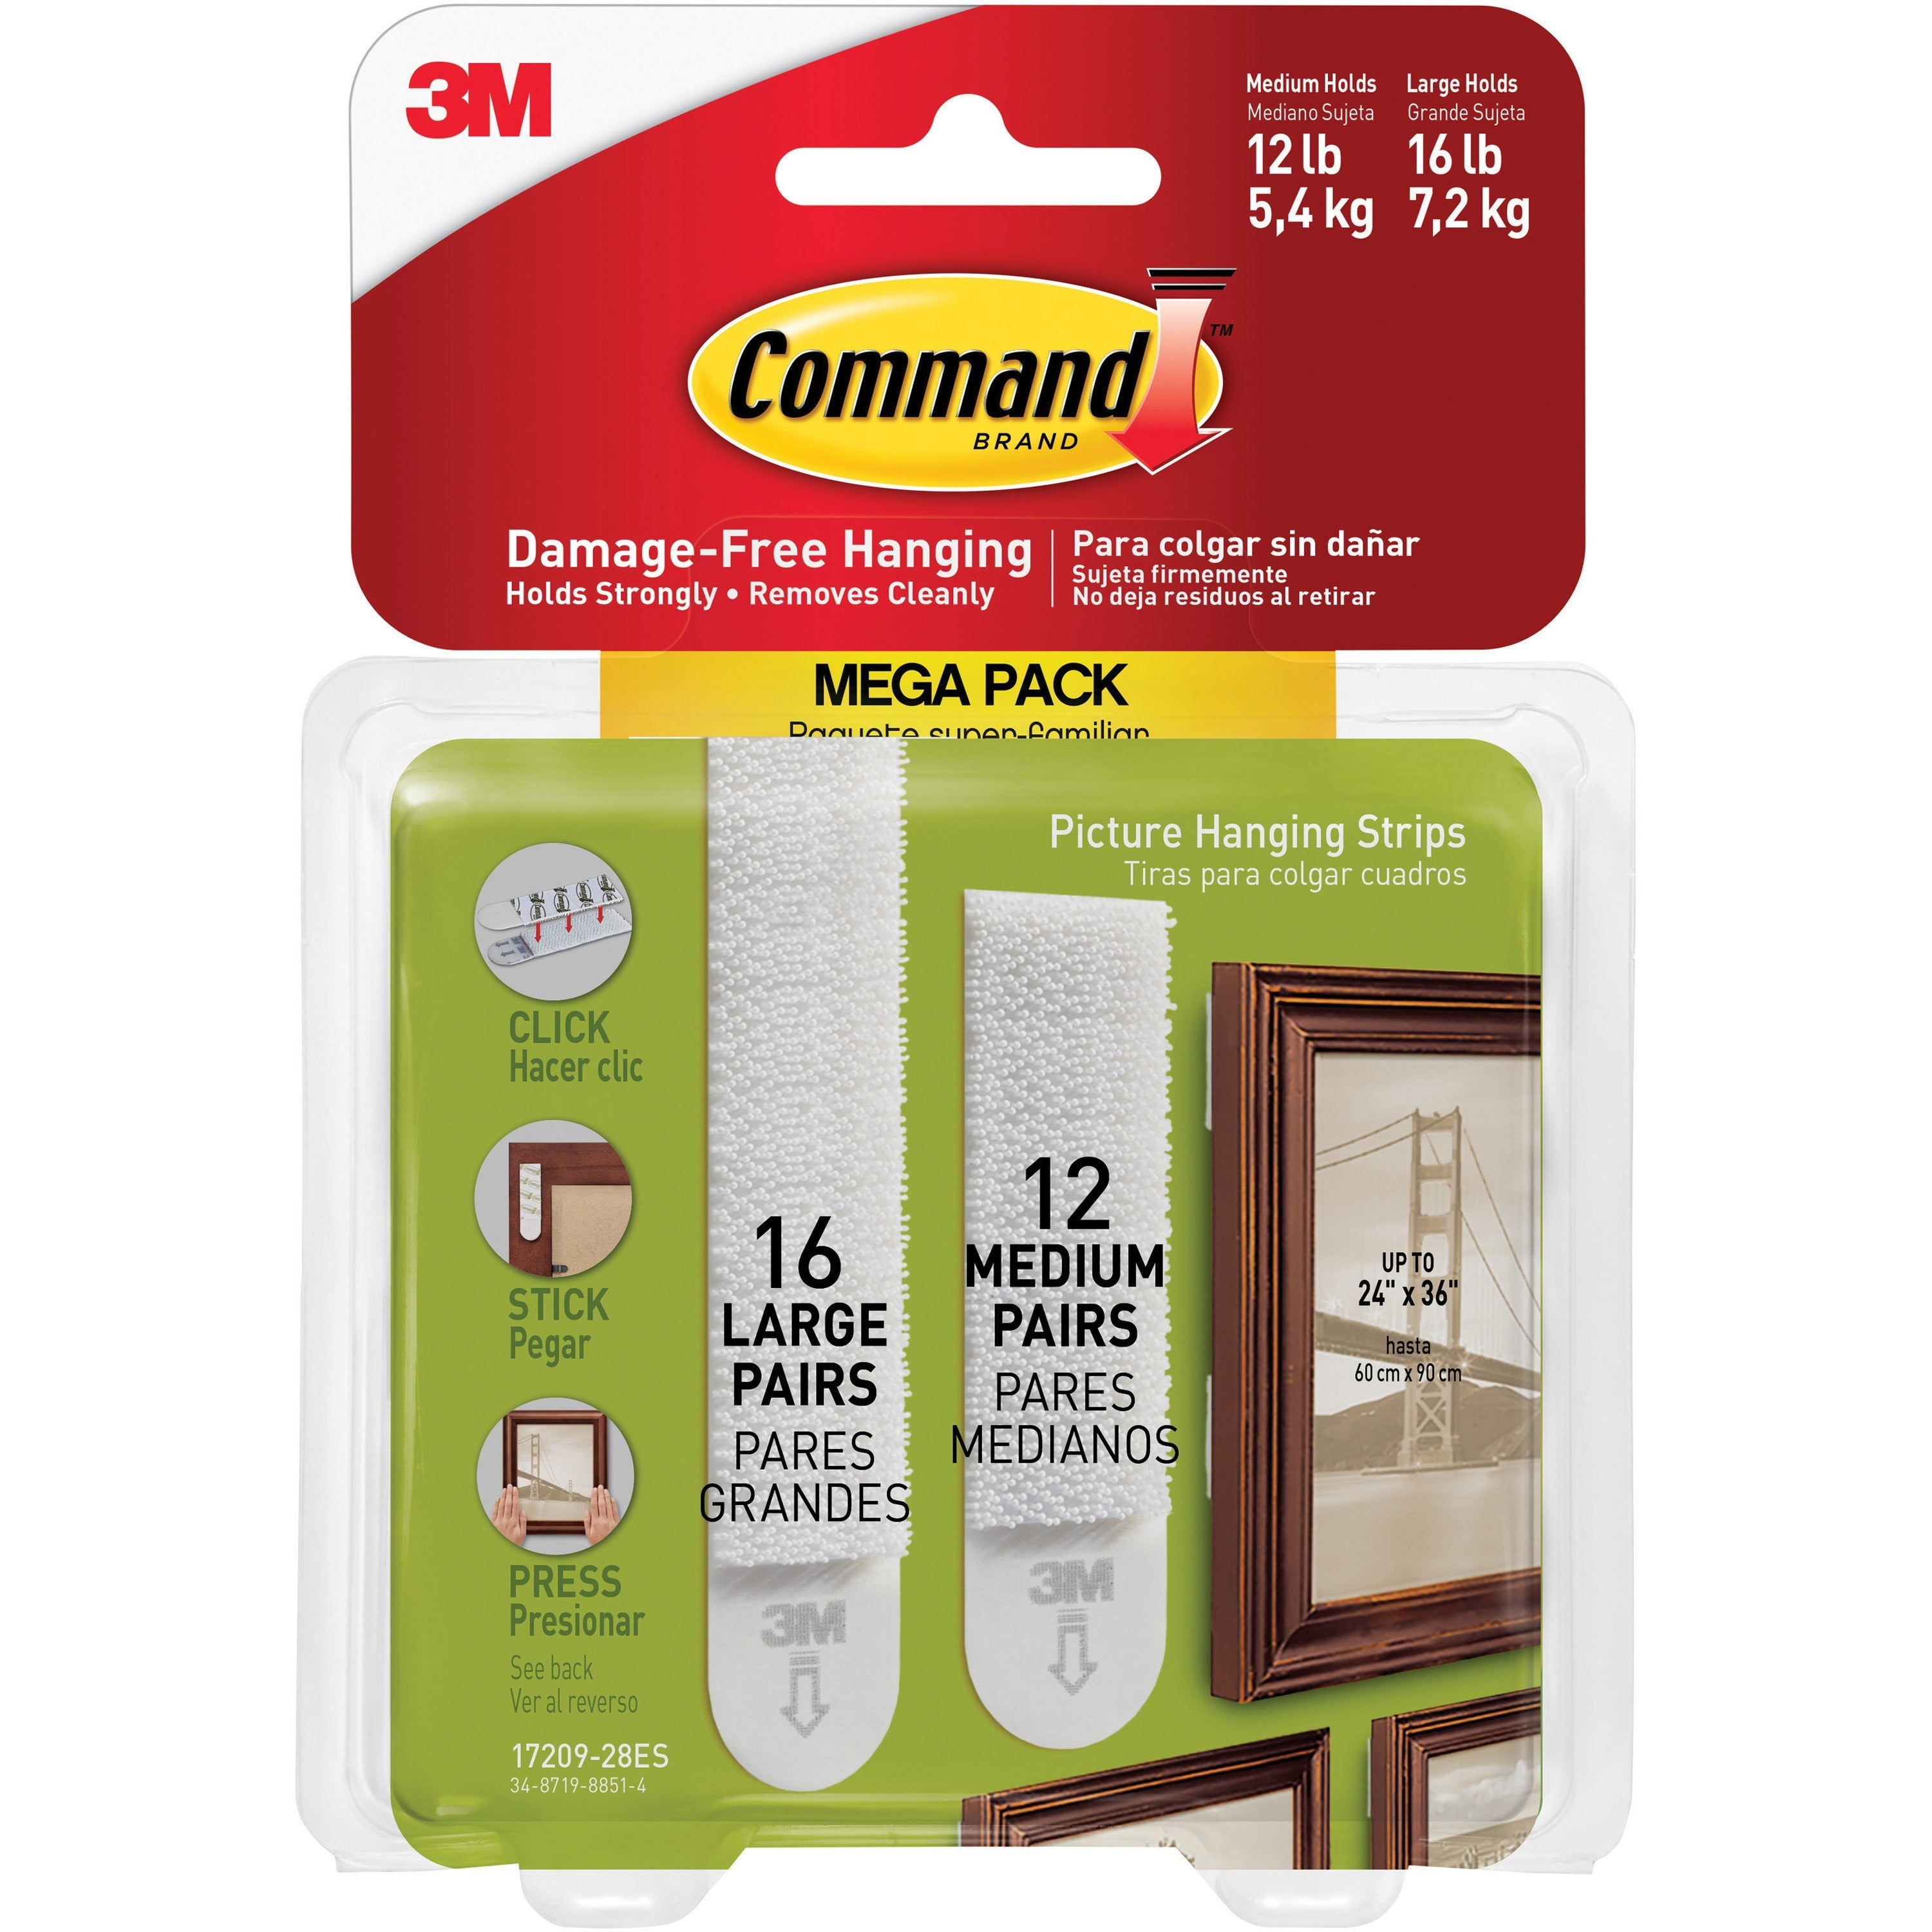 command-picture-hanging-strips-mega-pack-3-lb-136-kg-4-lb-181-kg-capacity-for-pictures-white-28-pack_mmm1720928es - 1